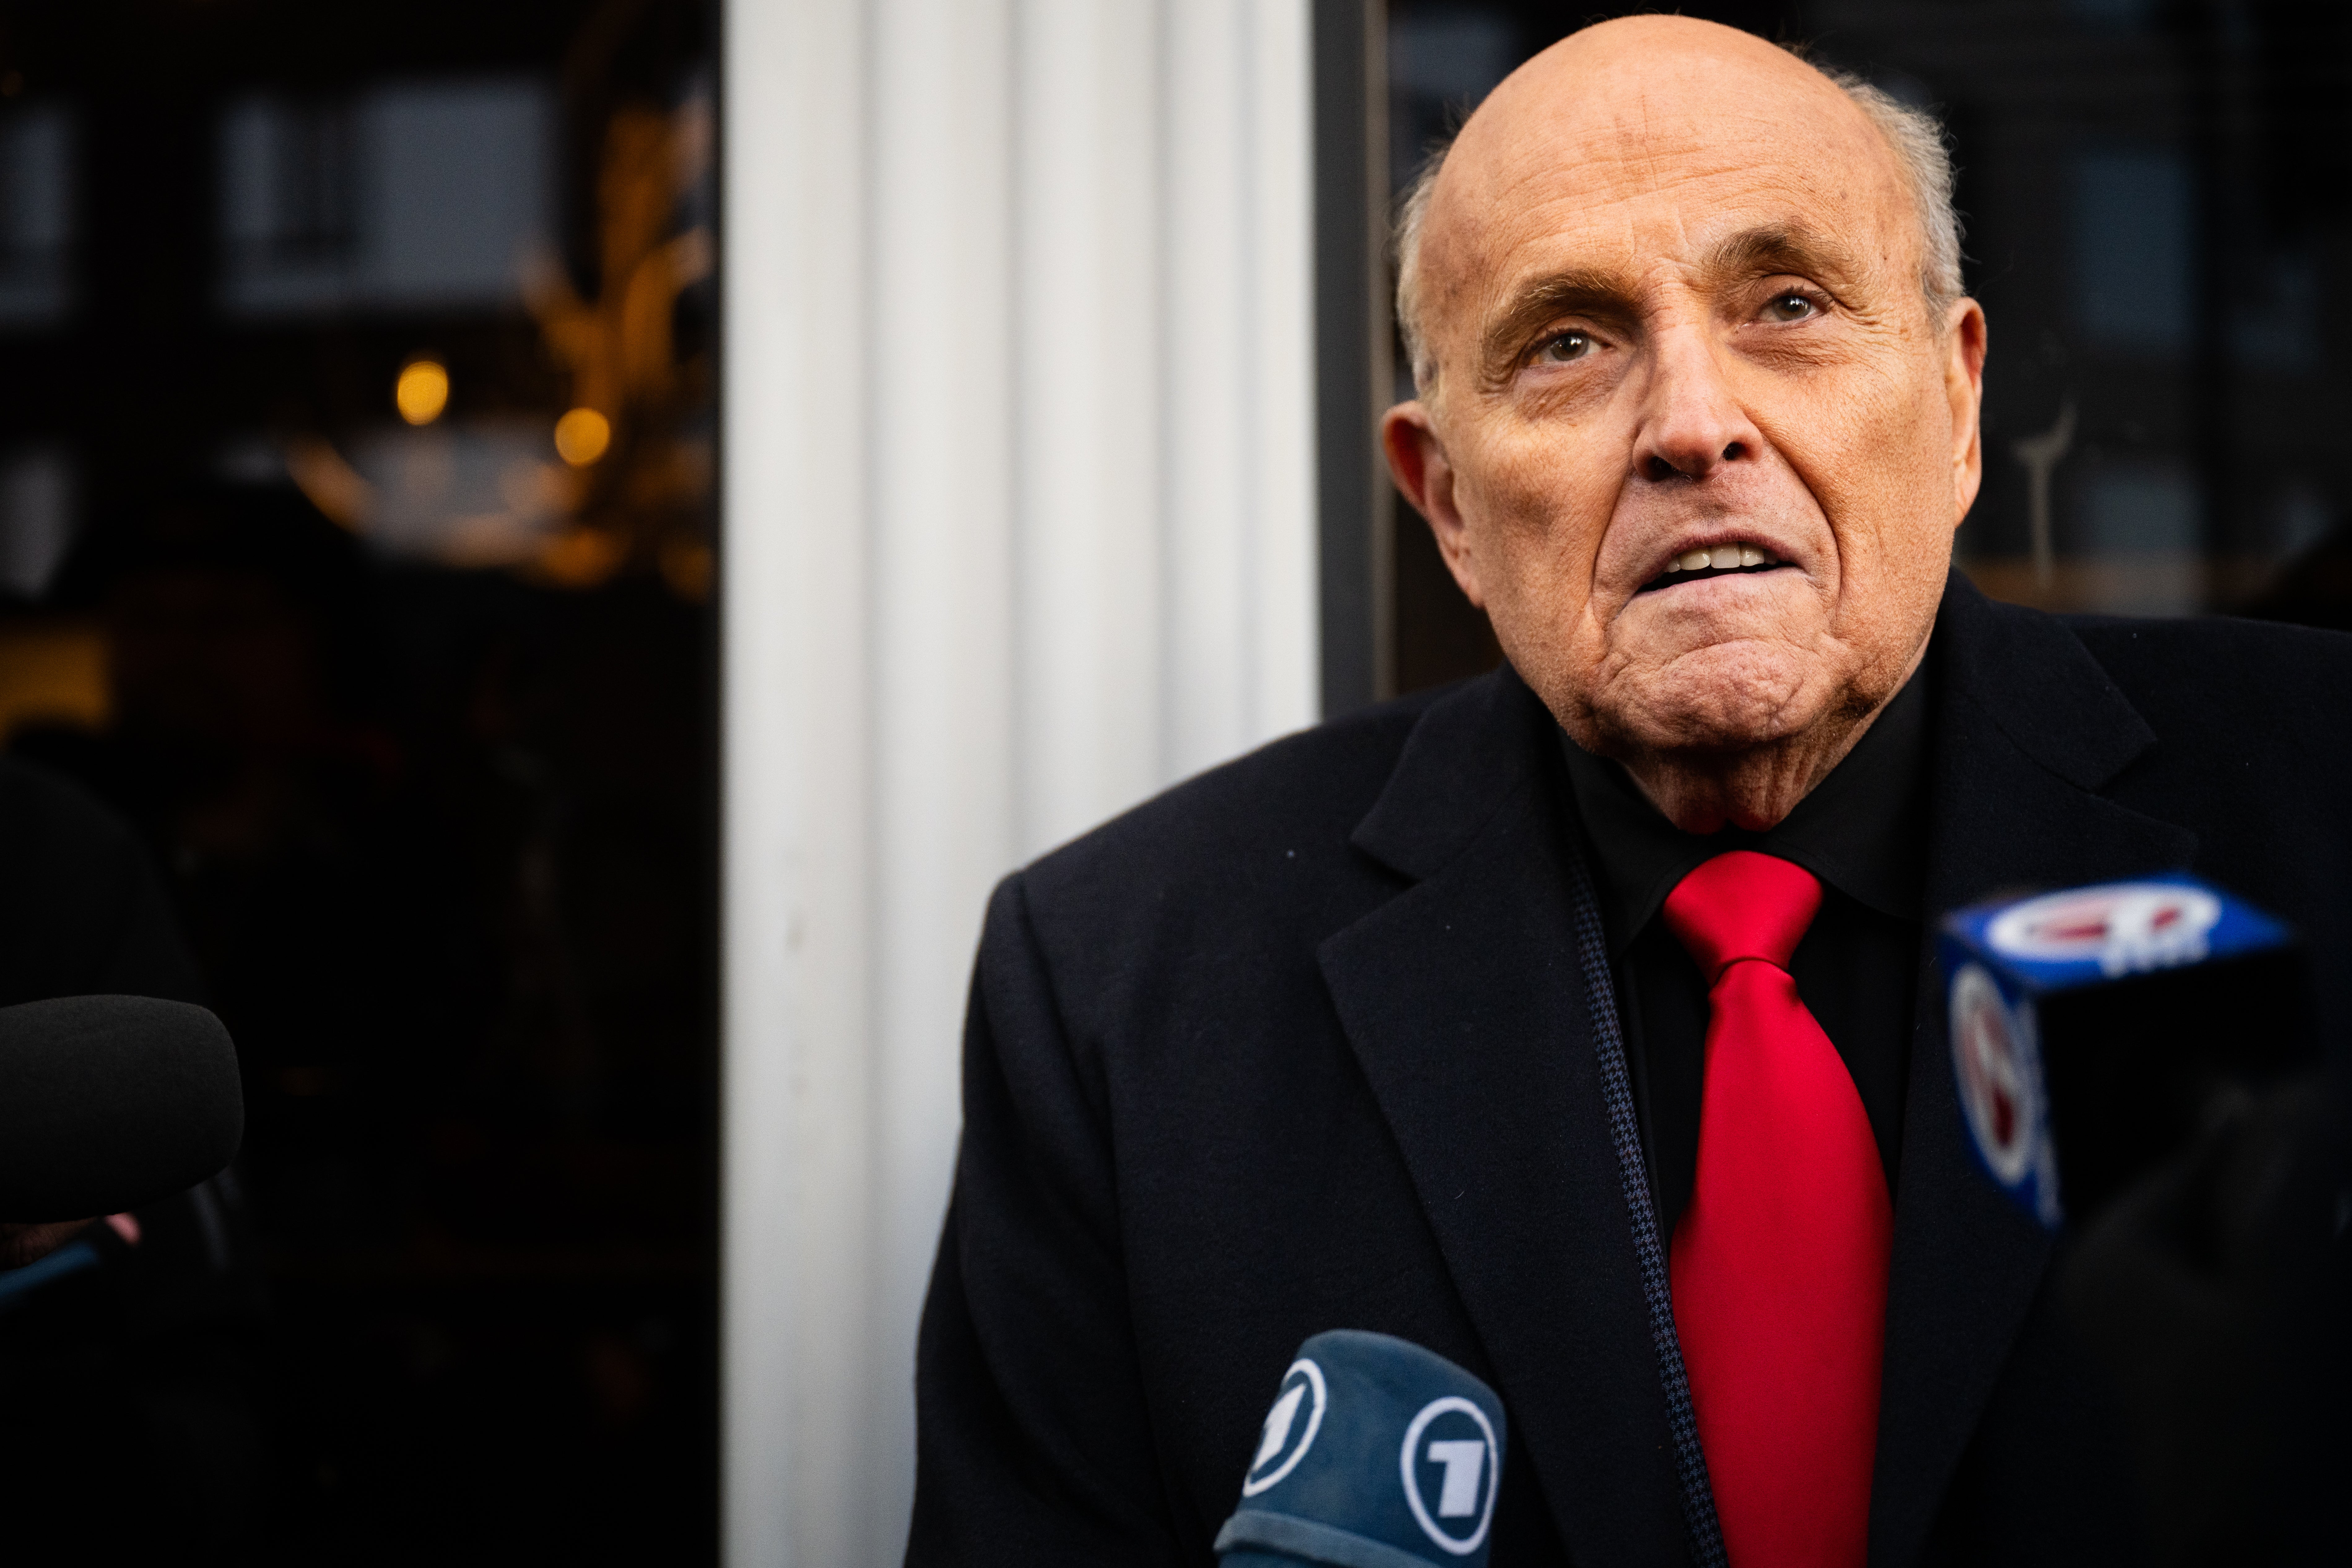 Rudy Giuliani speaks to members of the media on 21 January 2024 in Manchester, New Hampshire